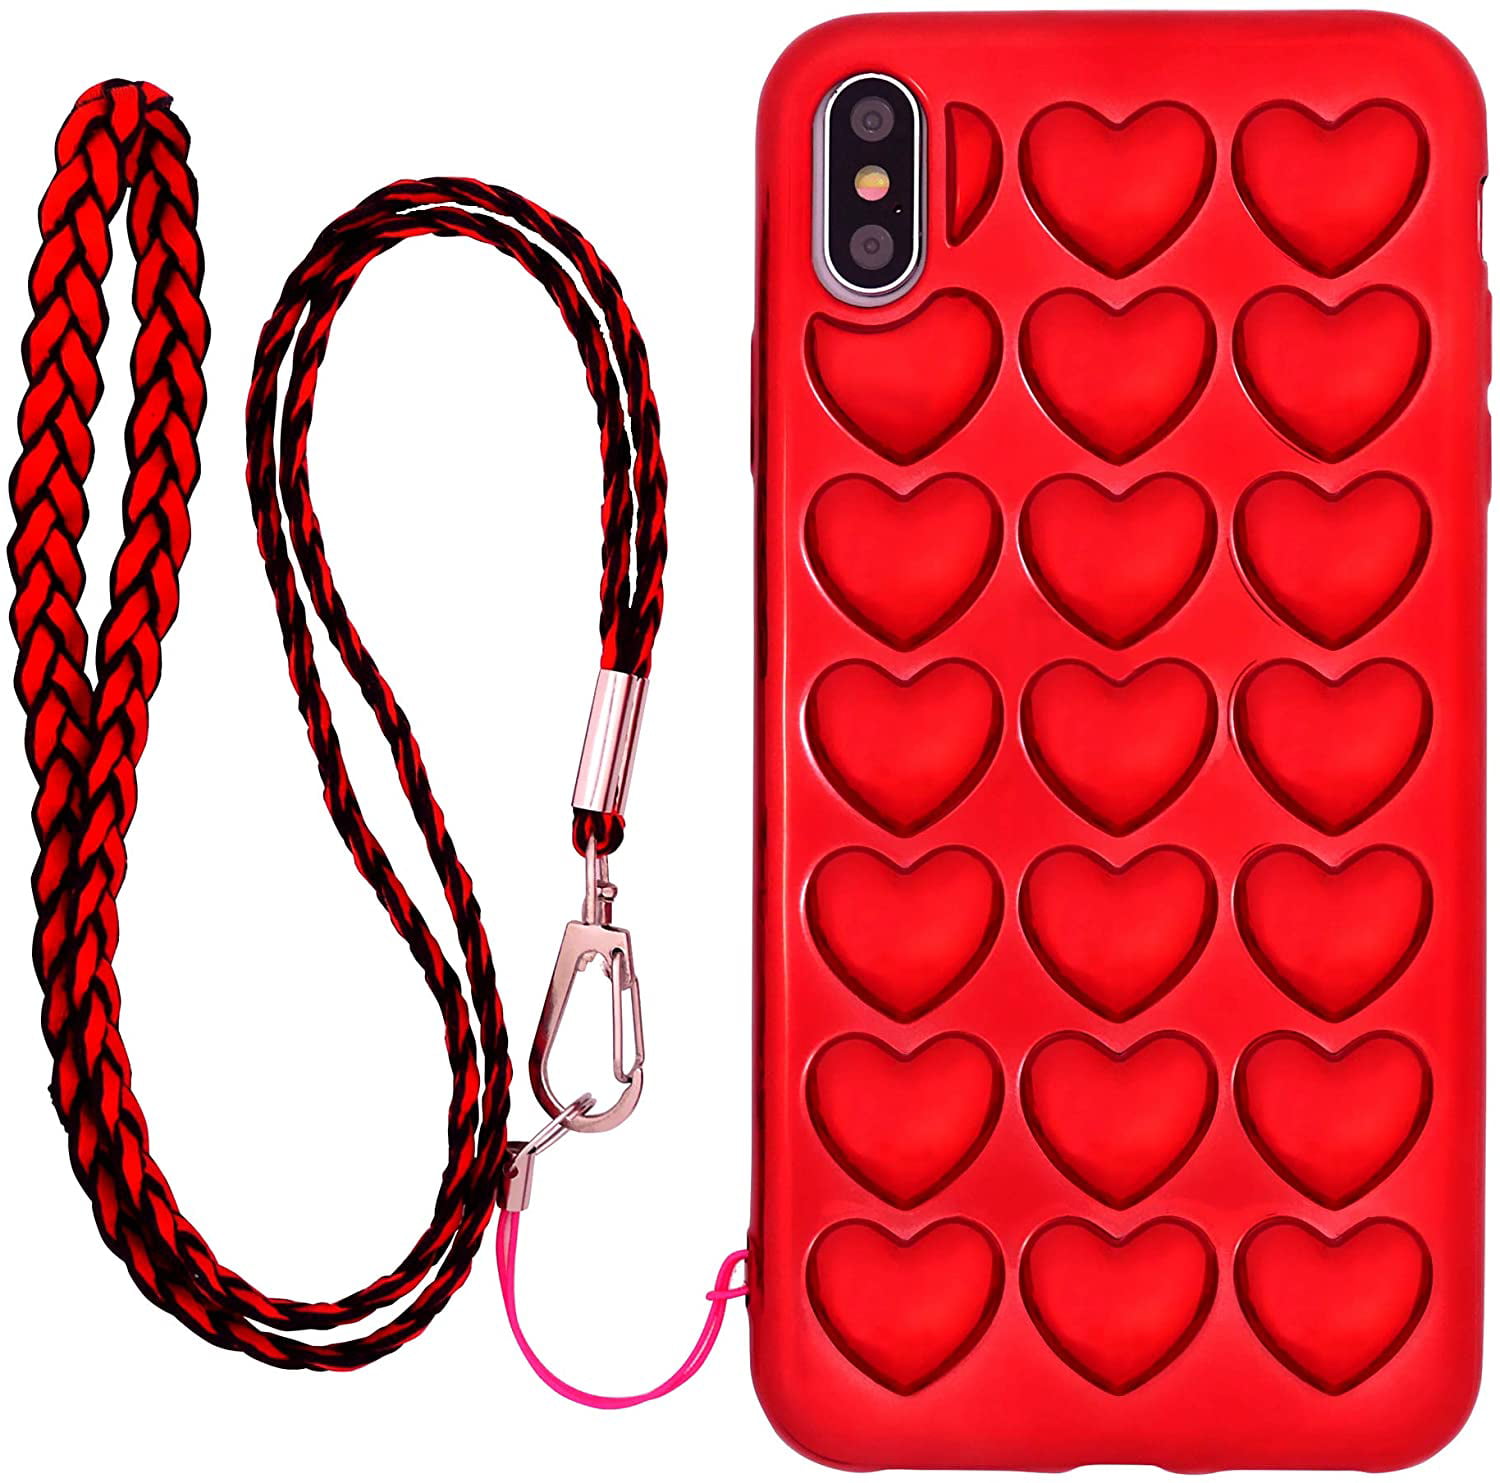 iPhone Xs Max Case for Women Cute Girly for iPhone 10s Max 6.5 inch Red DMaos 3D Bubble Heart Cover with Lanyard Strap Necklace